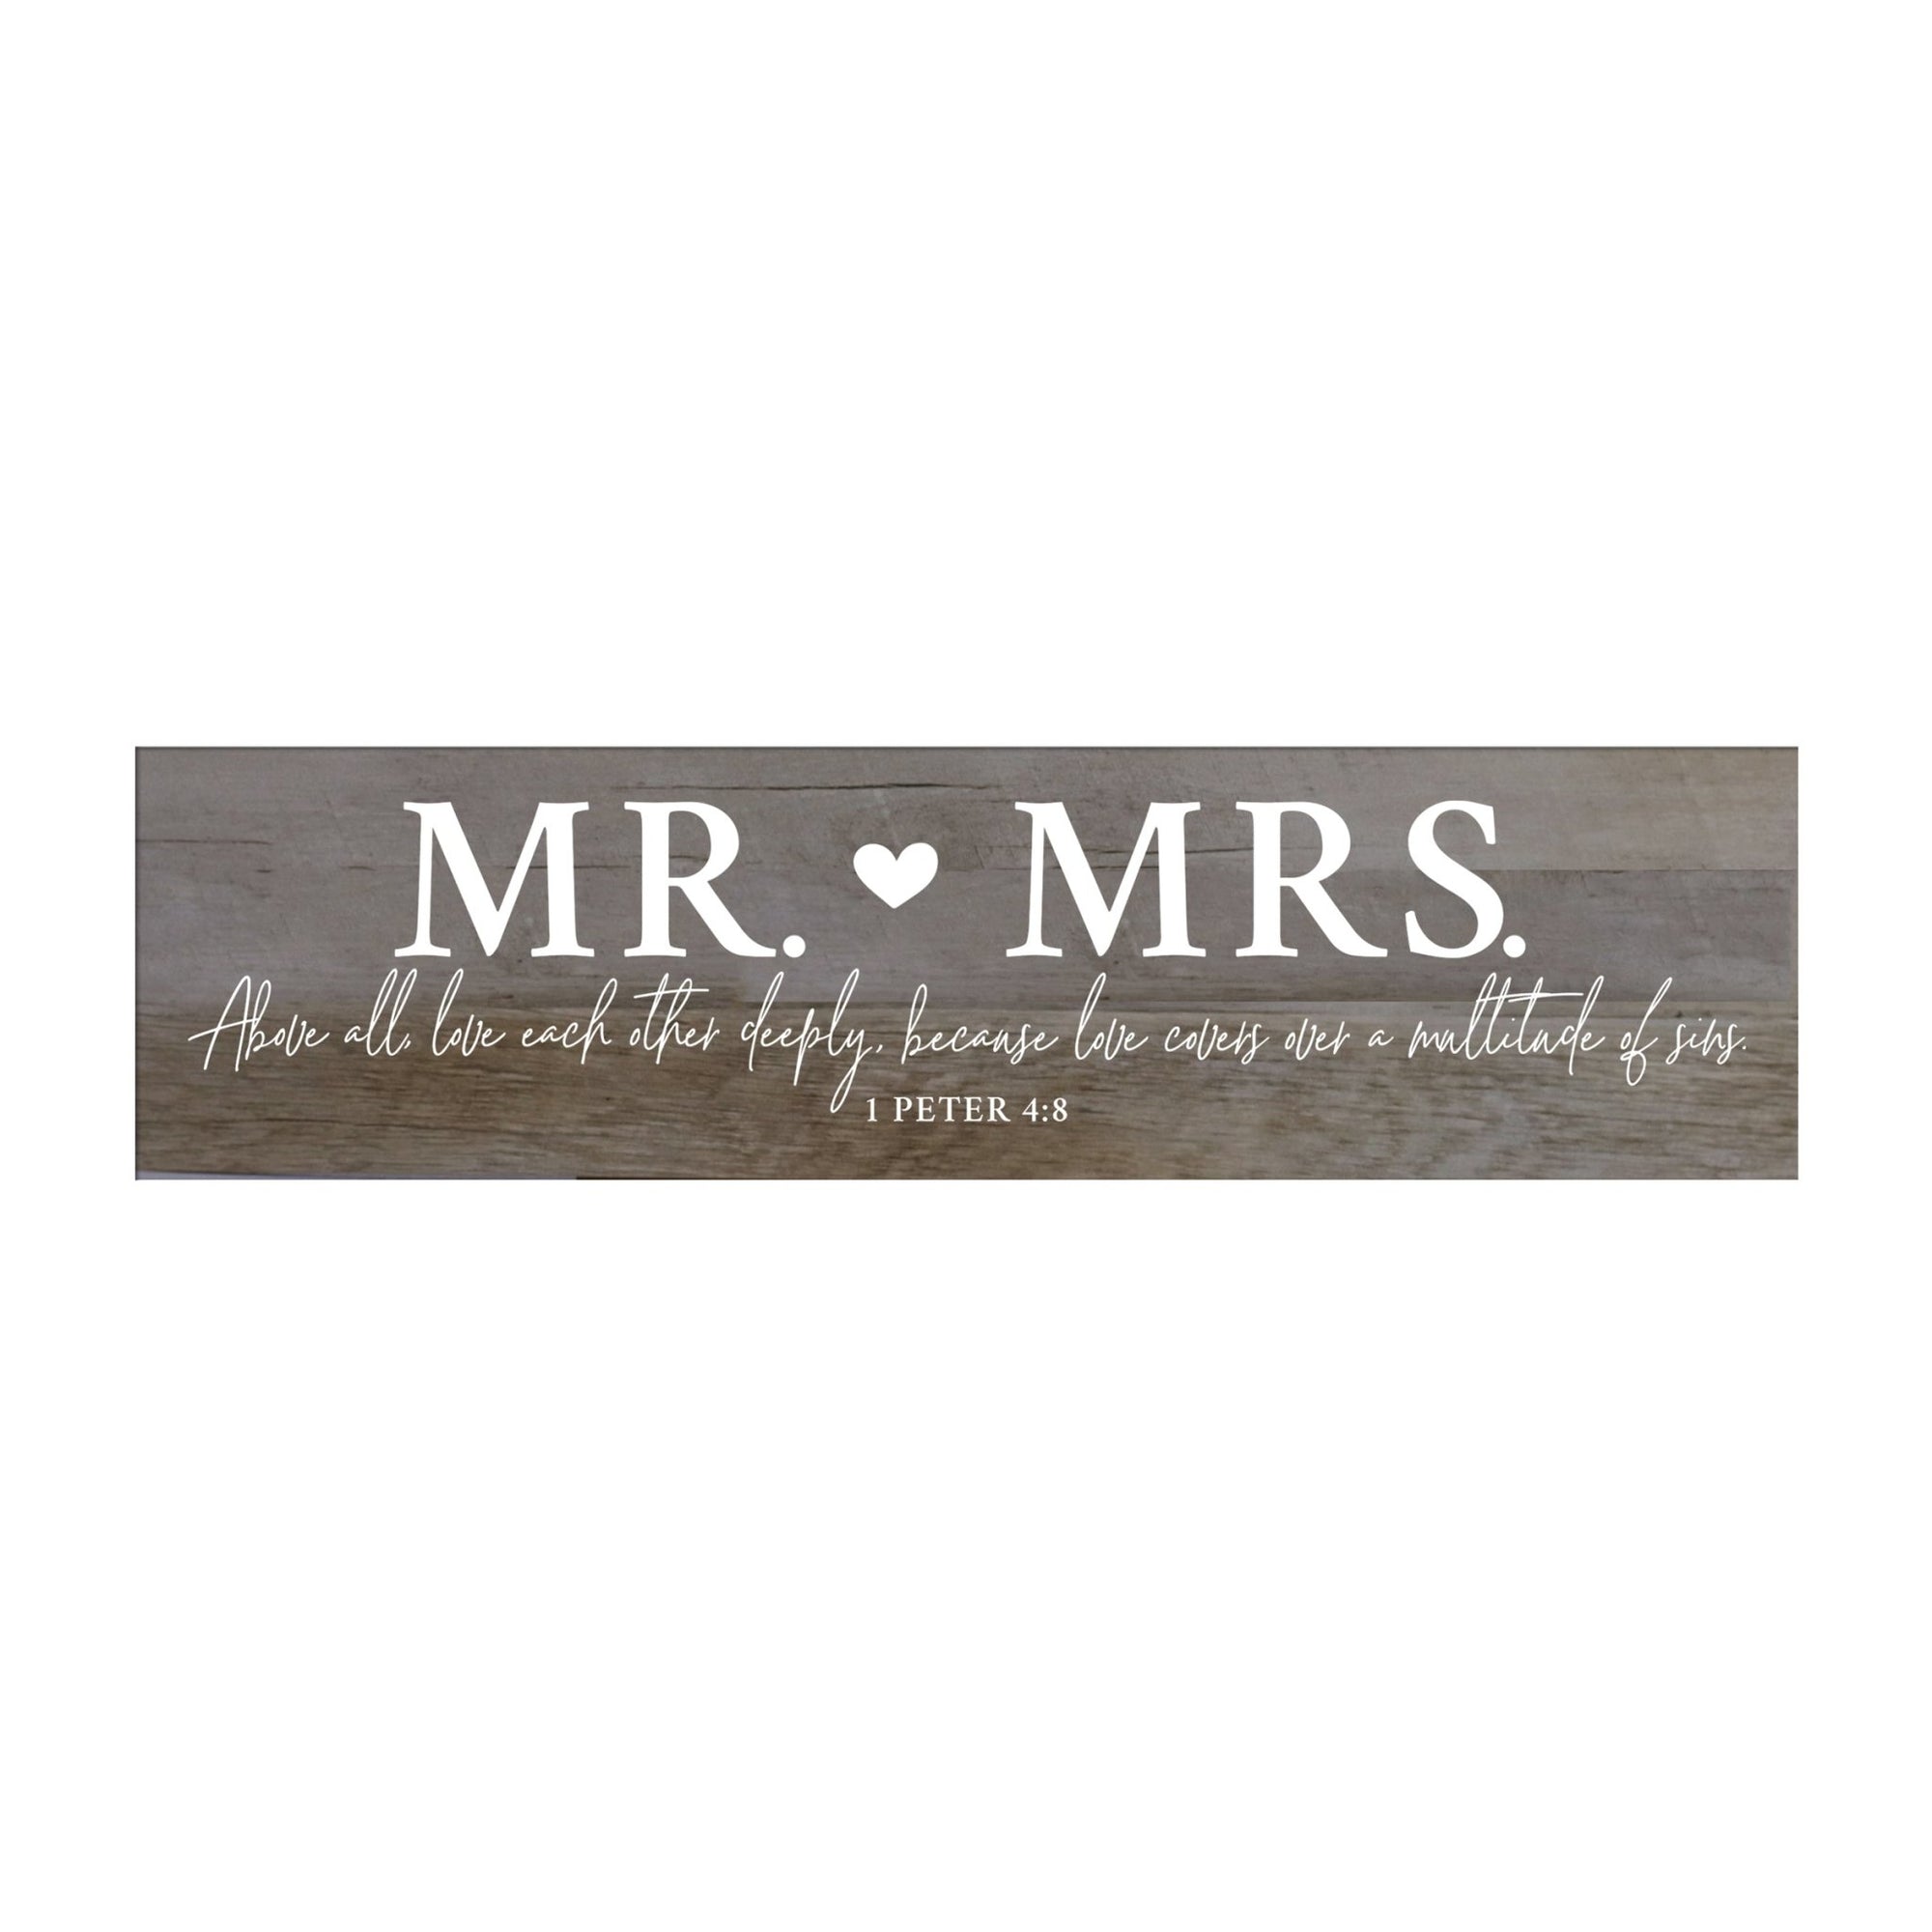 Inspirational Everyday Home and Family Wooden Wall Art Hanging Plaque 10 x 40 – Mr. & Mrs. - LifeSong Milestones